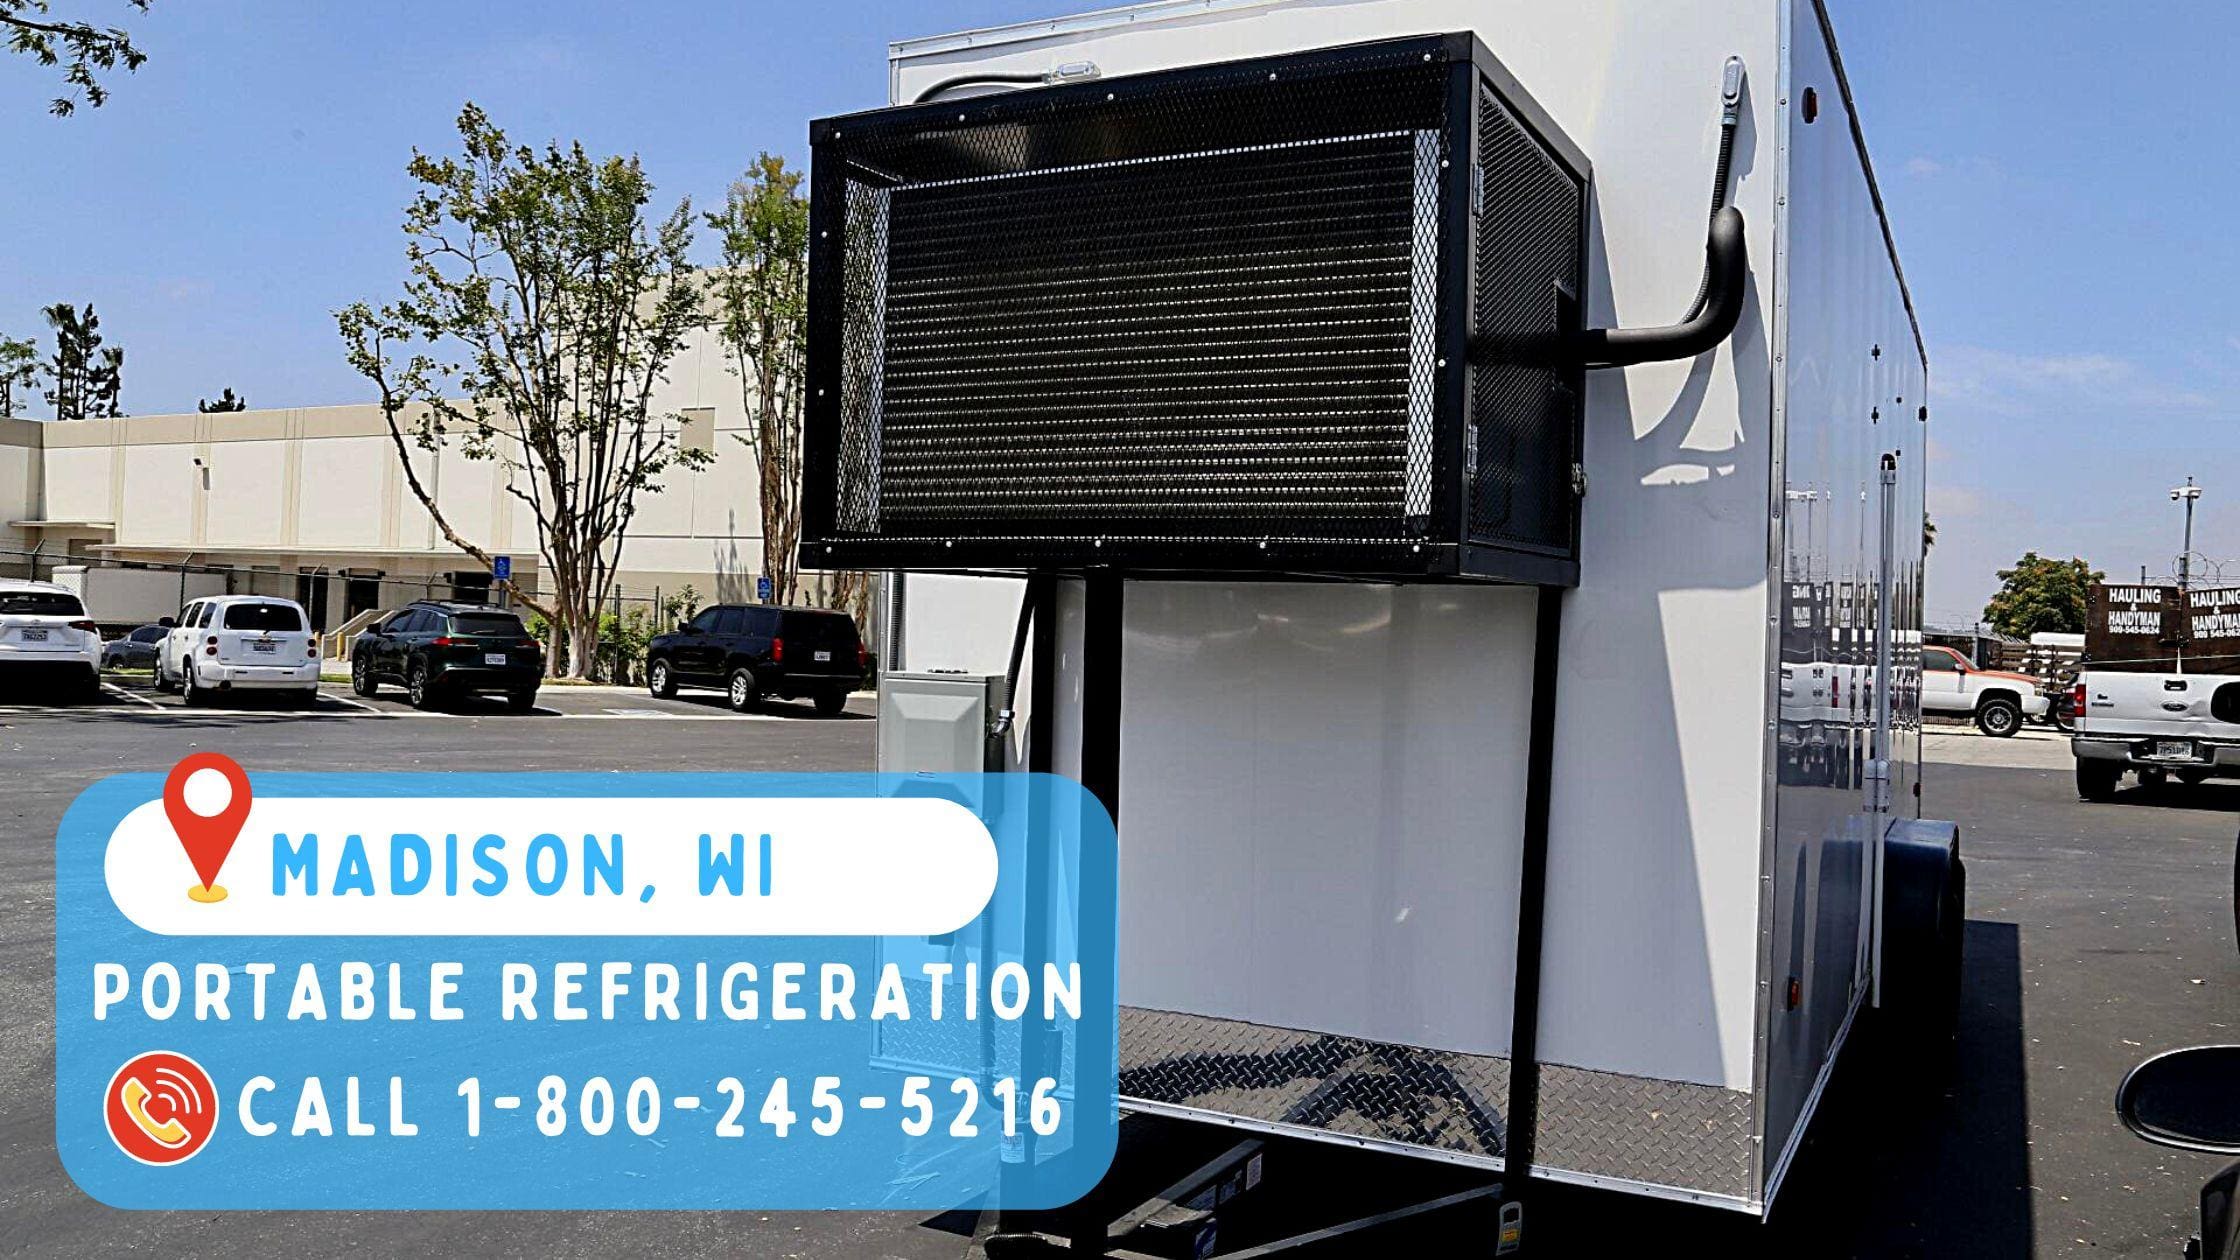 Portable refrigeration located in Madison